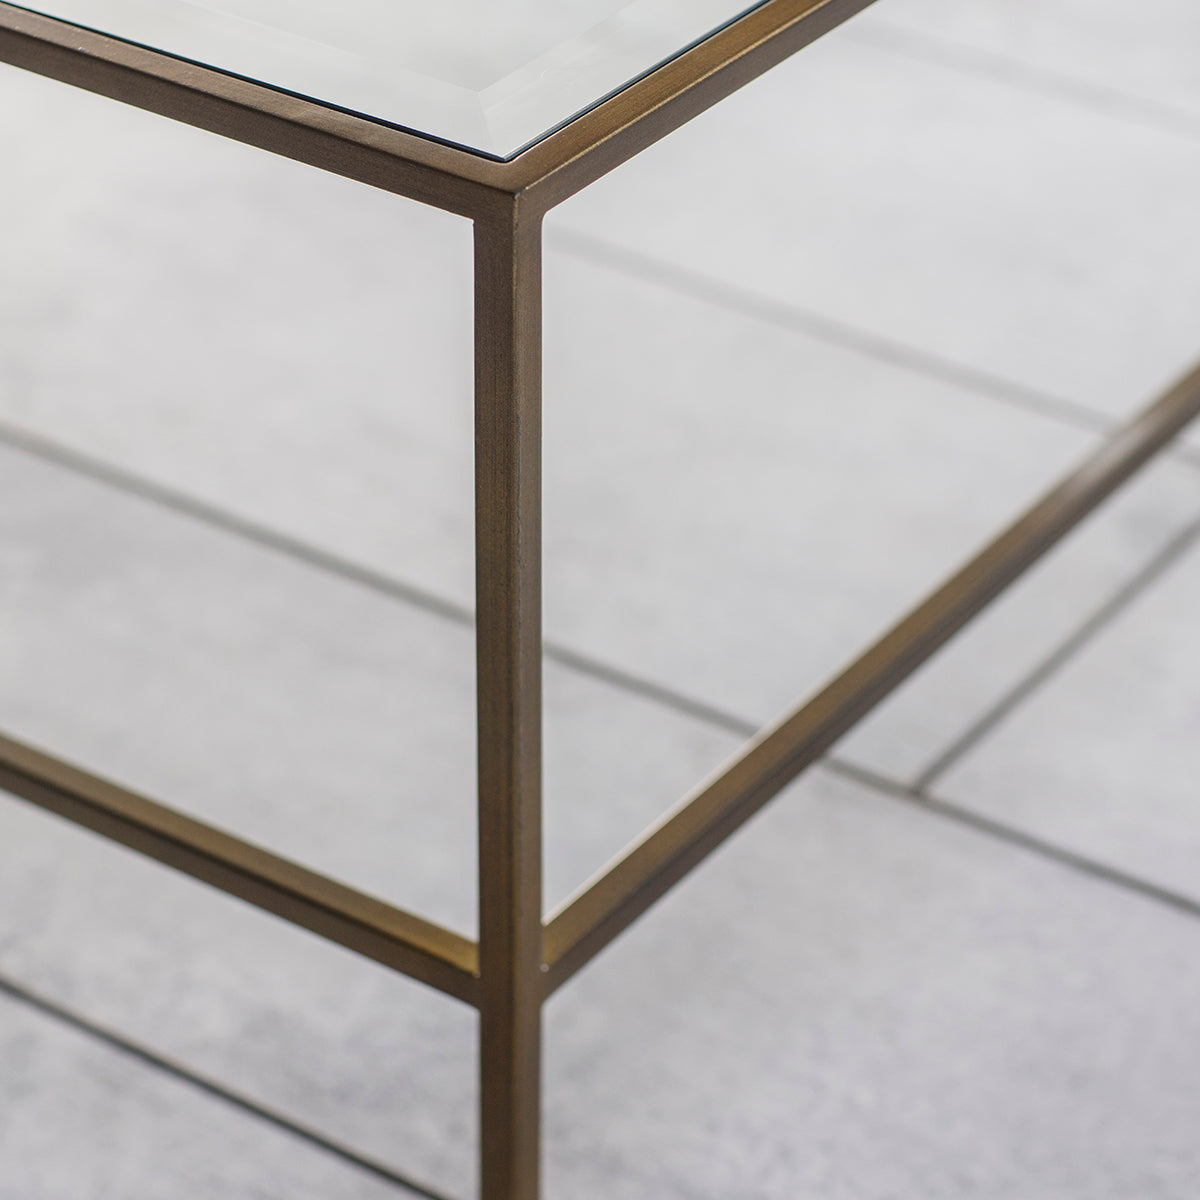 An Engleborne Coffee Table Bronze 1200x650x400mm with a brass frame and glass top, sold by Kikiathome.co.uk, perfect for interior decor.